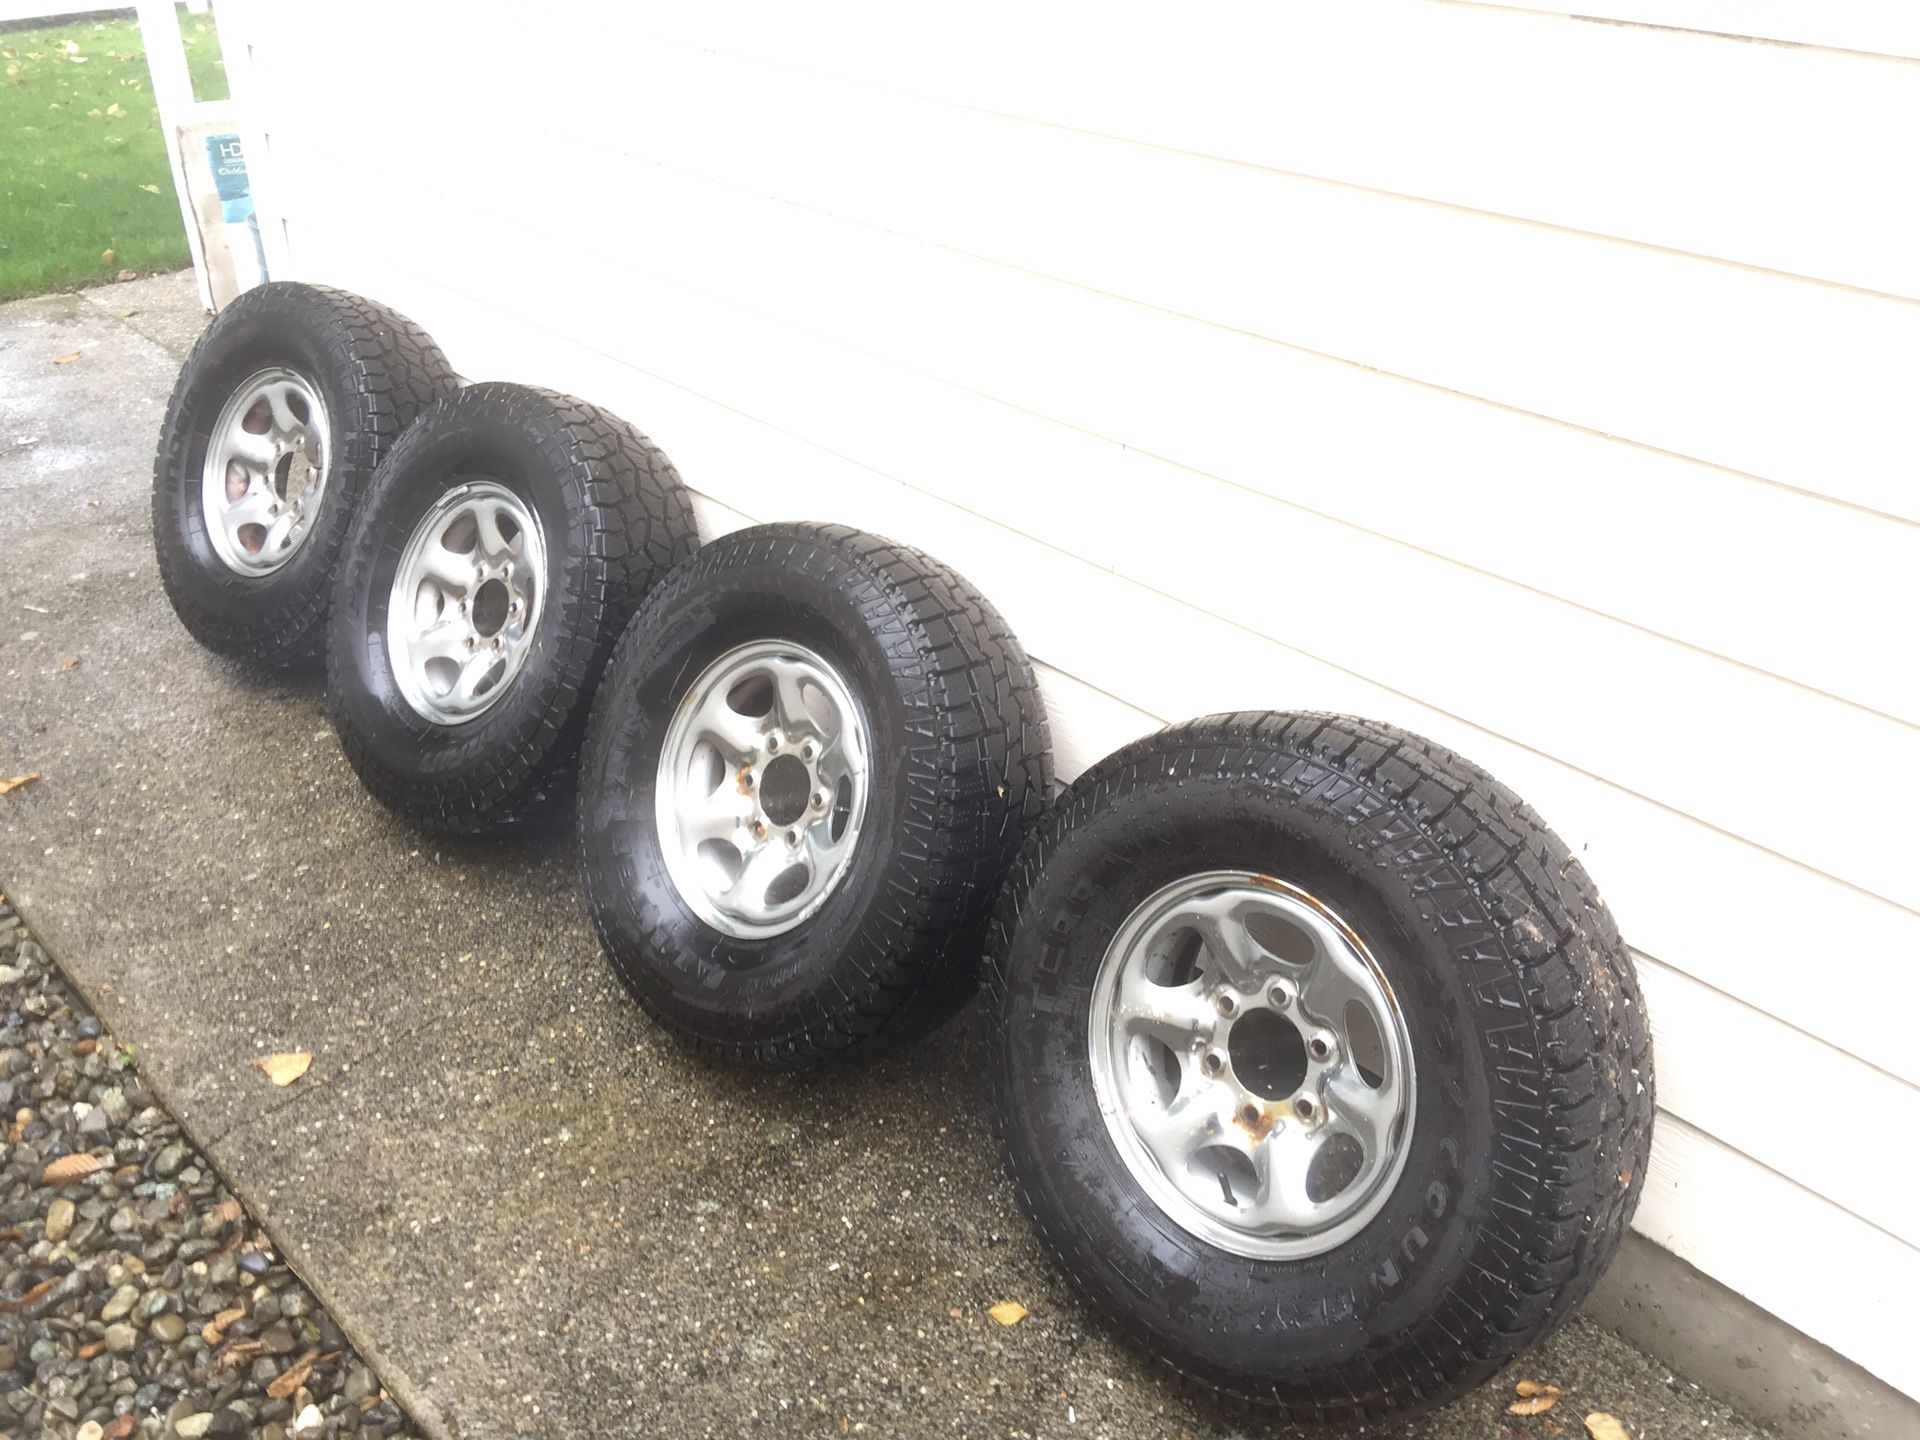 31” Tires 10.5 R 15 LT With Nissan Rims